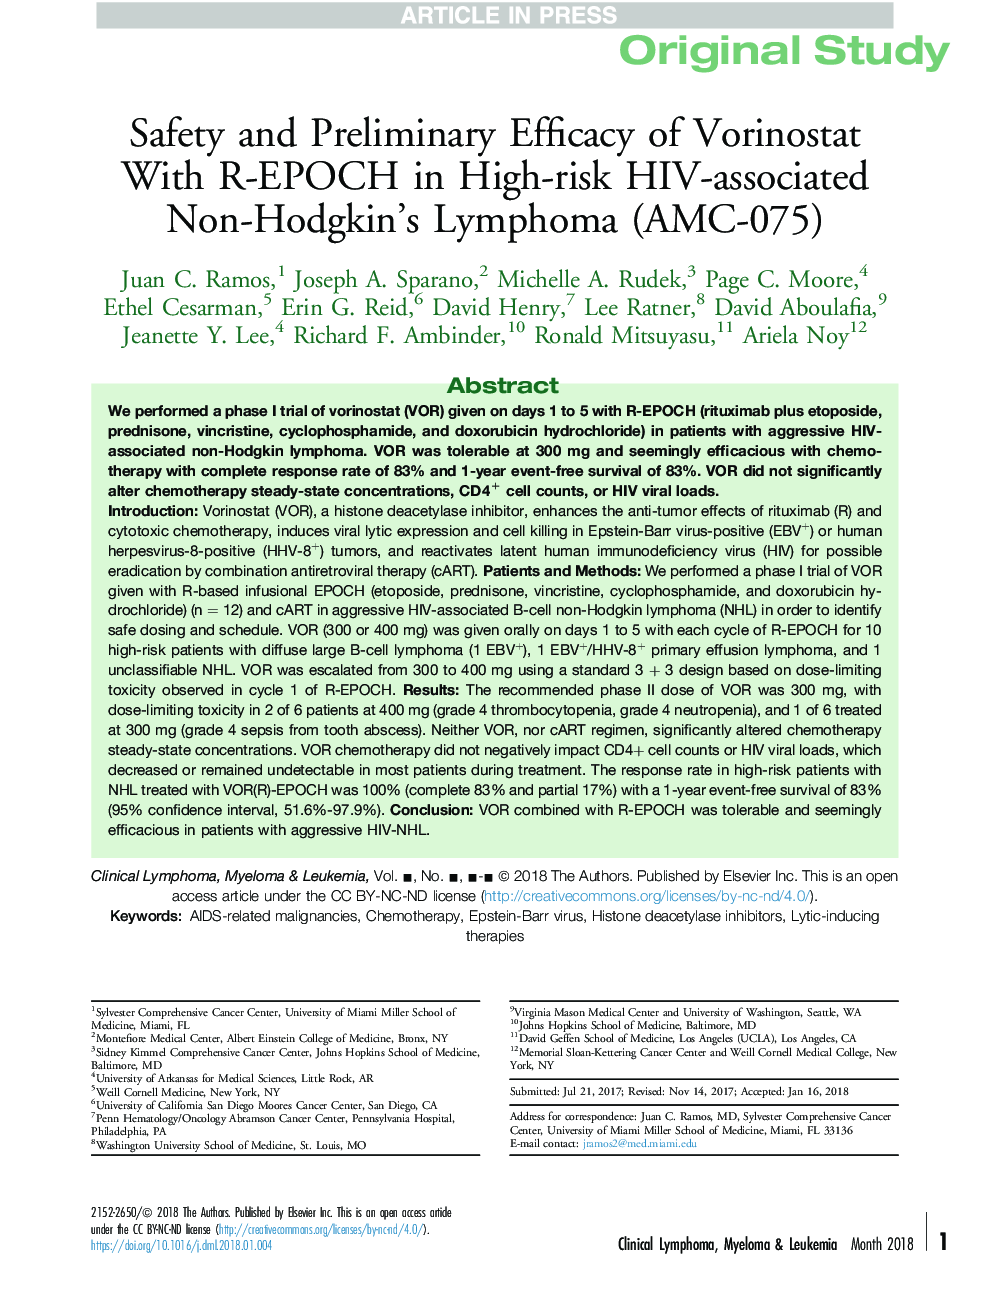 Safety and Preliminary Efficacy of Vorinostat WithÂ R-EPOCH in High-risk HIV-associated Non-Hodgkin's Lymphoma (AMC-075)